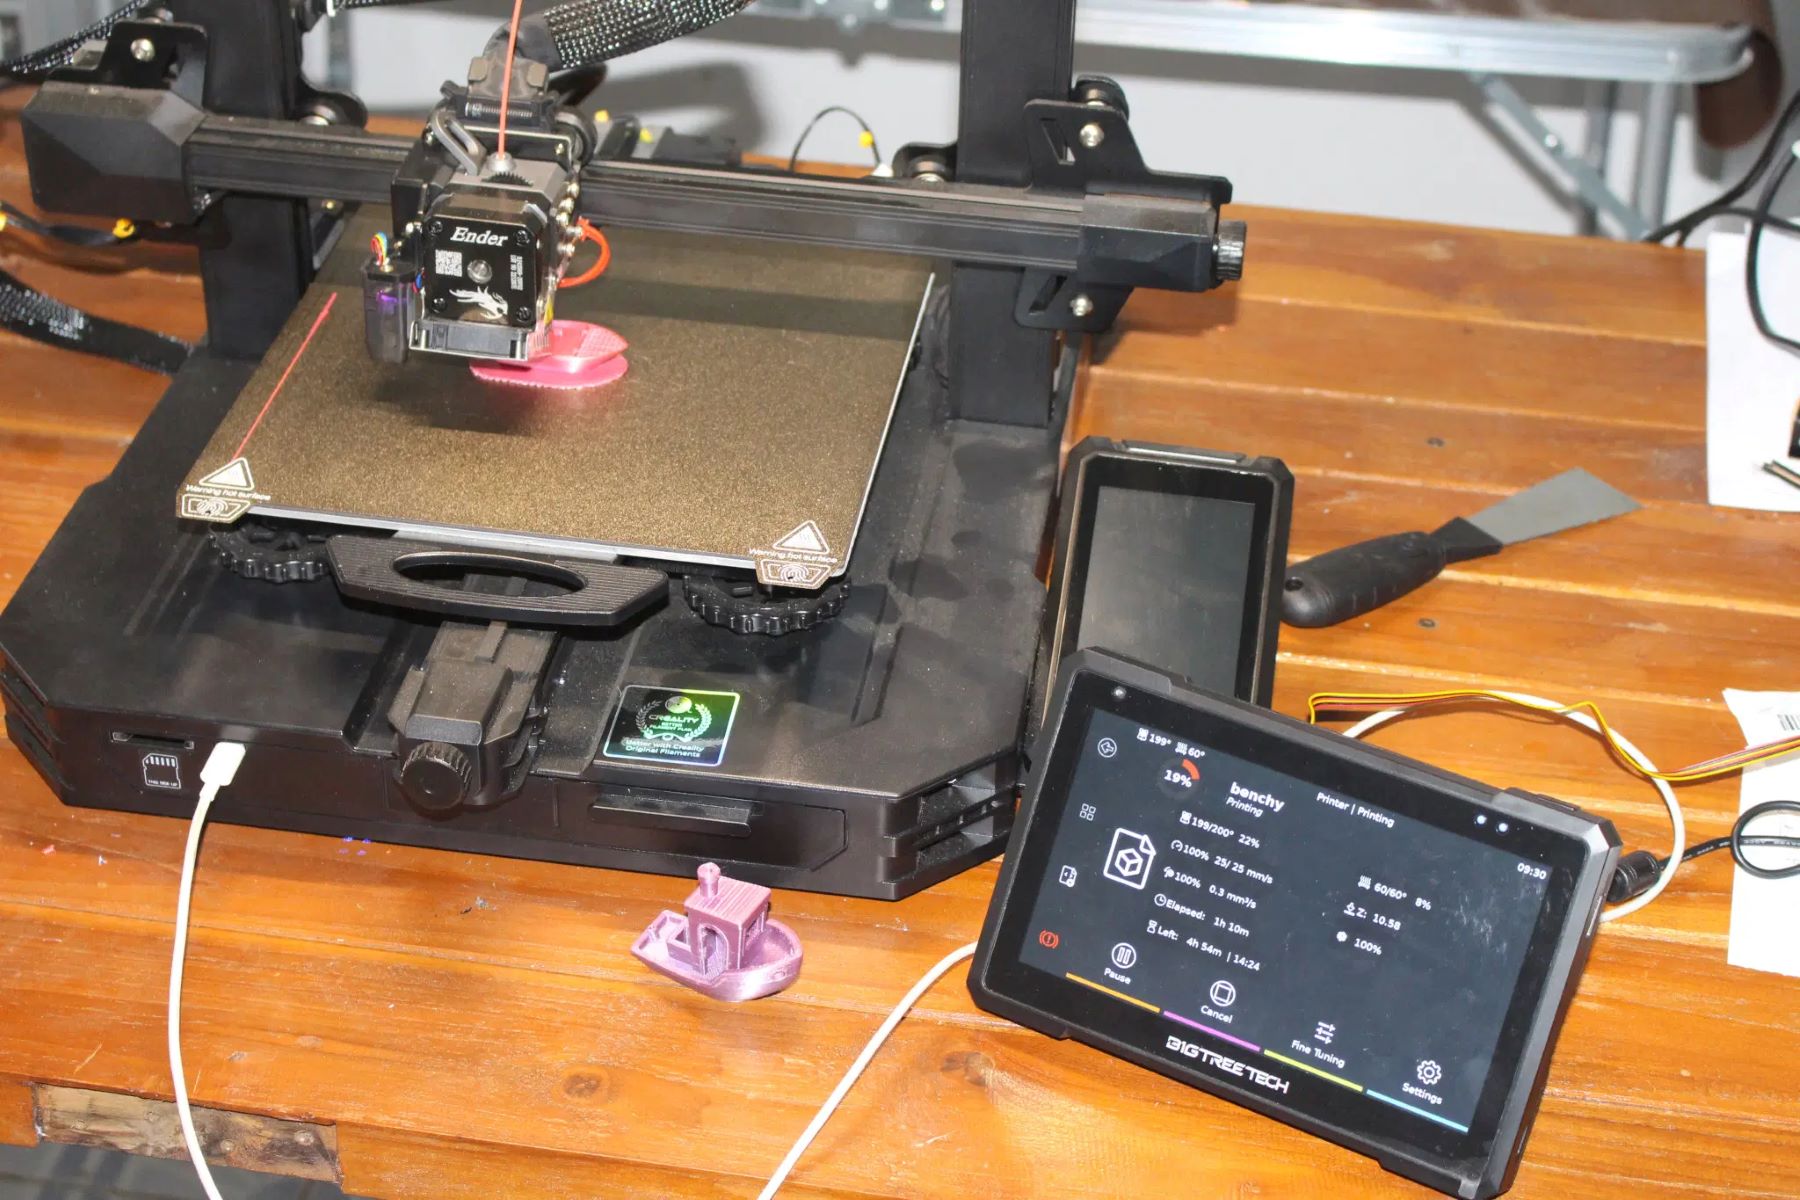 How To Send G-code To A 3D Printer